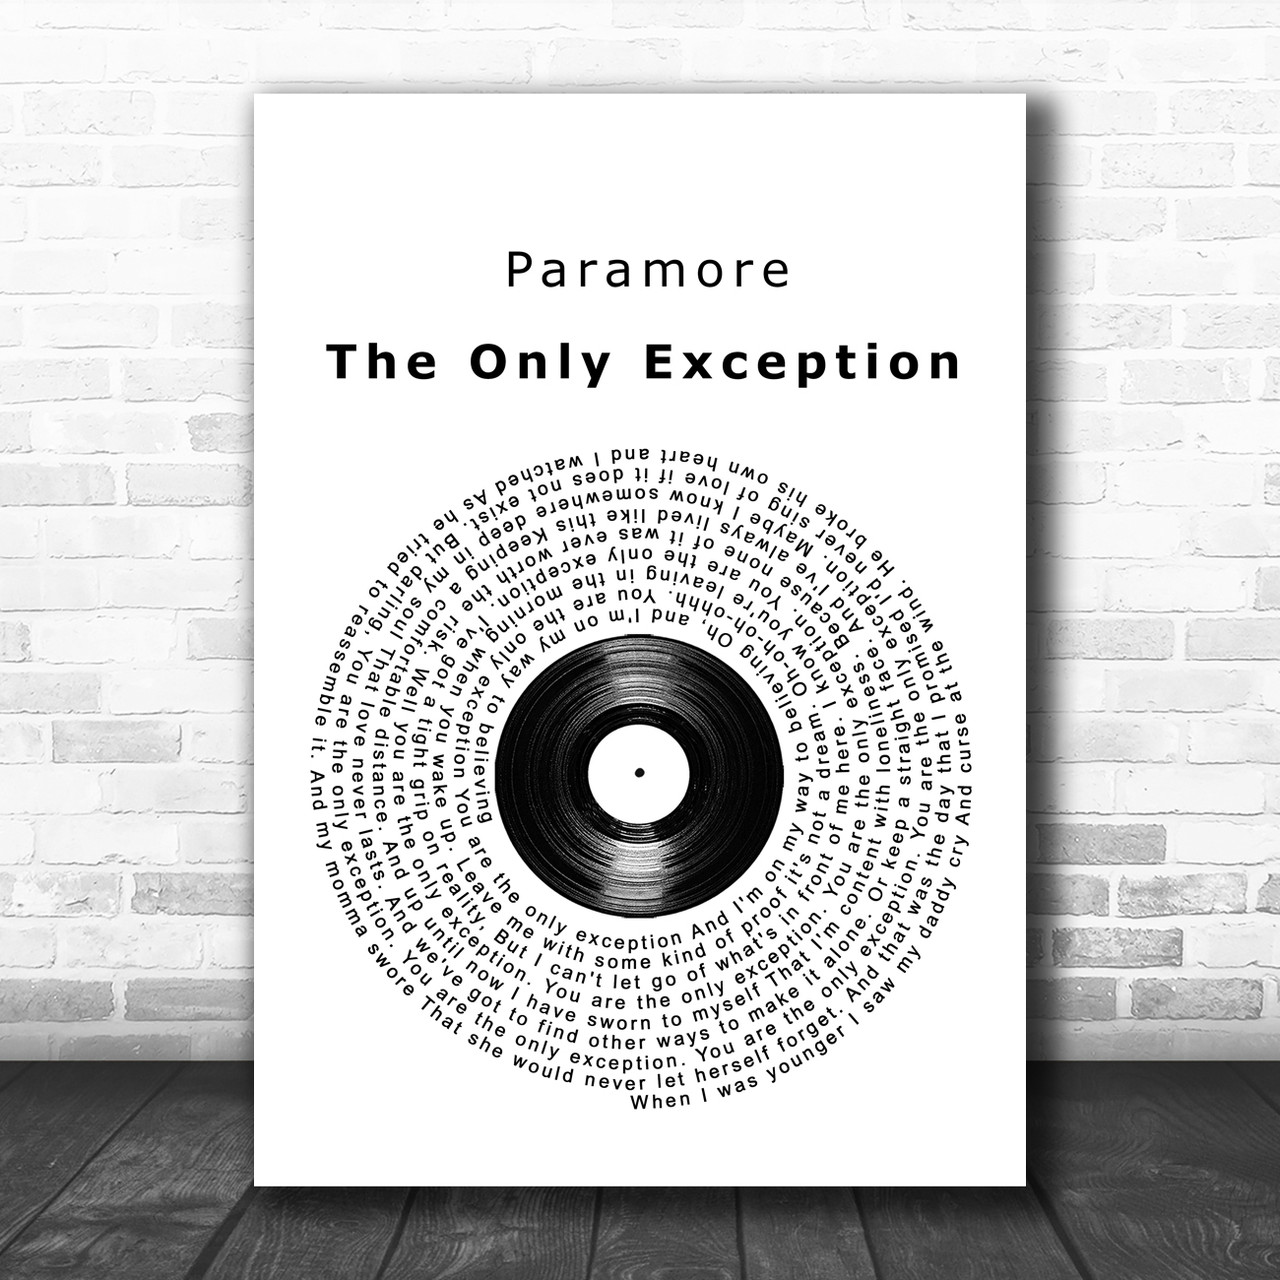 Paramore - The Only Exception (Brand New Eyes Deluxe Edition) 